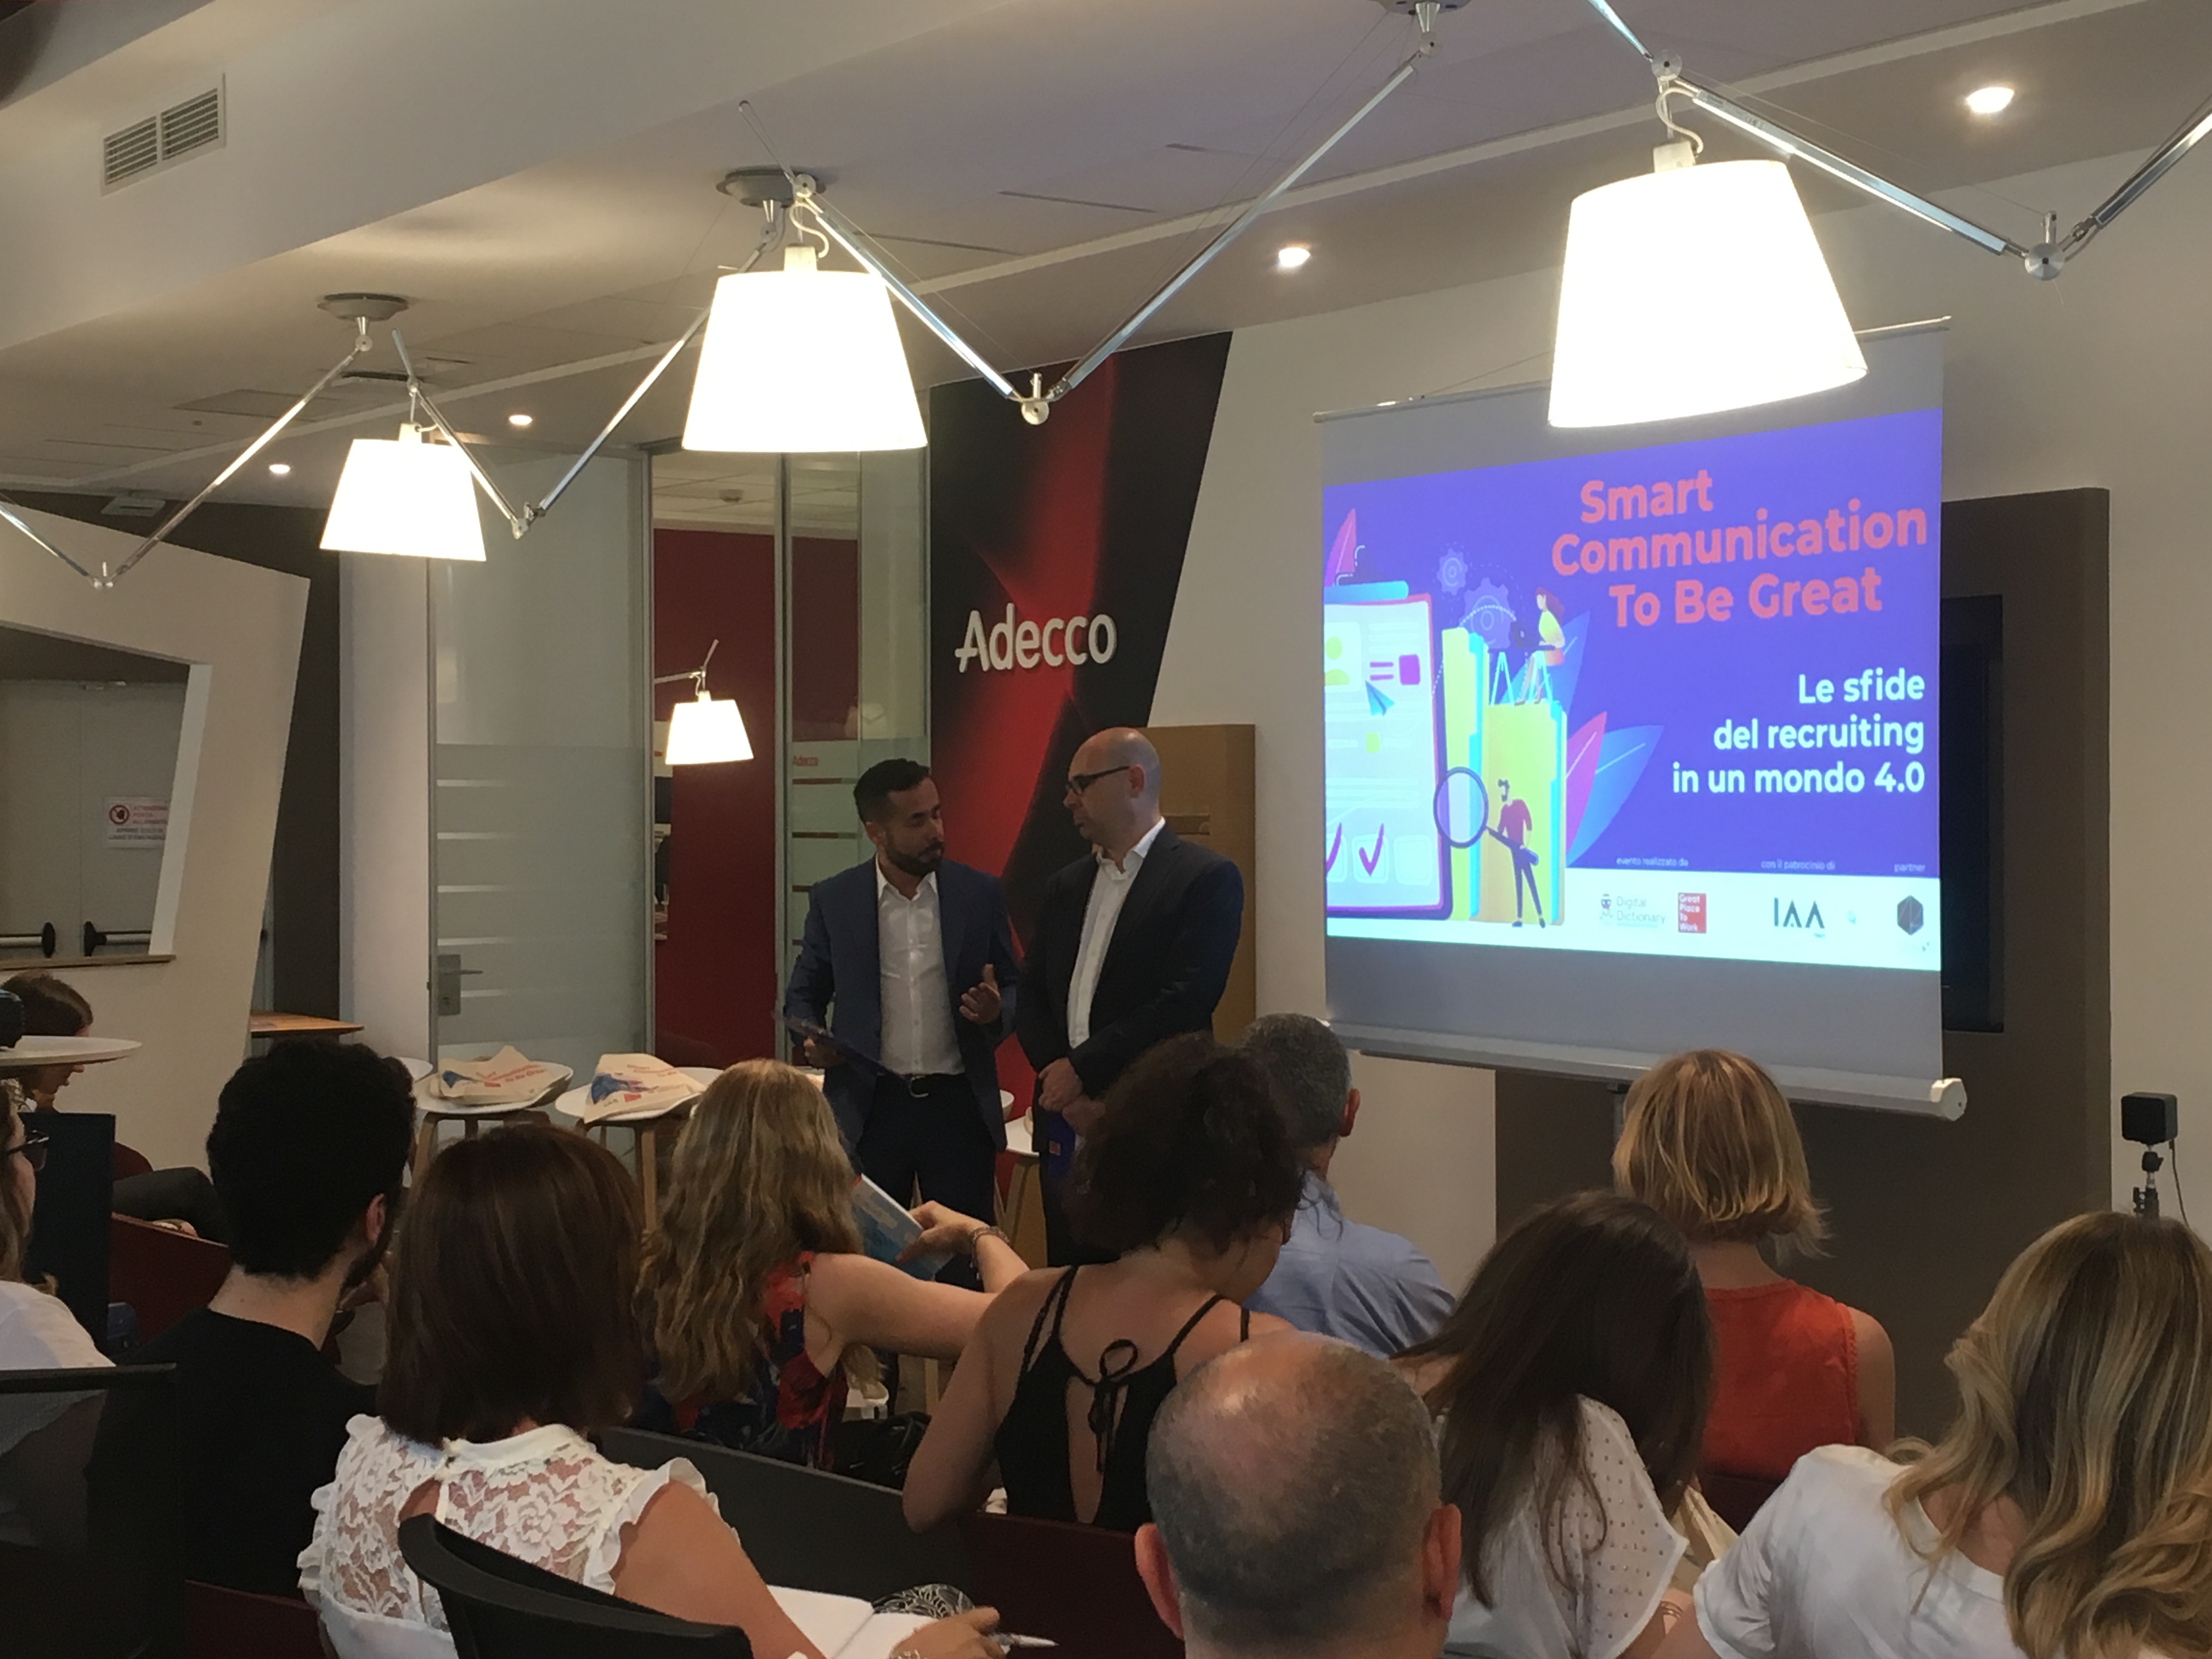  Evento "Smart Communication To Be Great" - i materiali